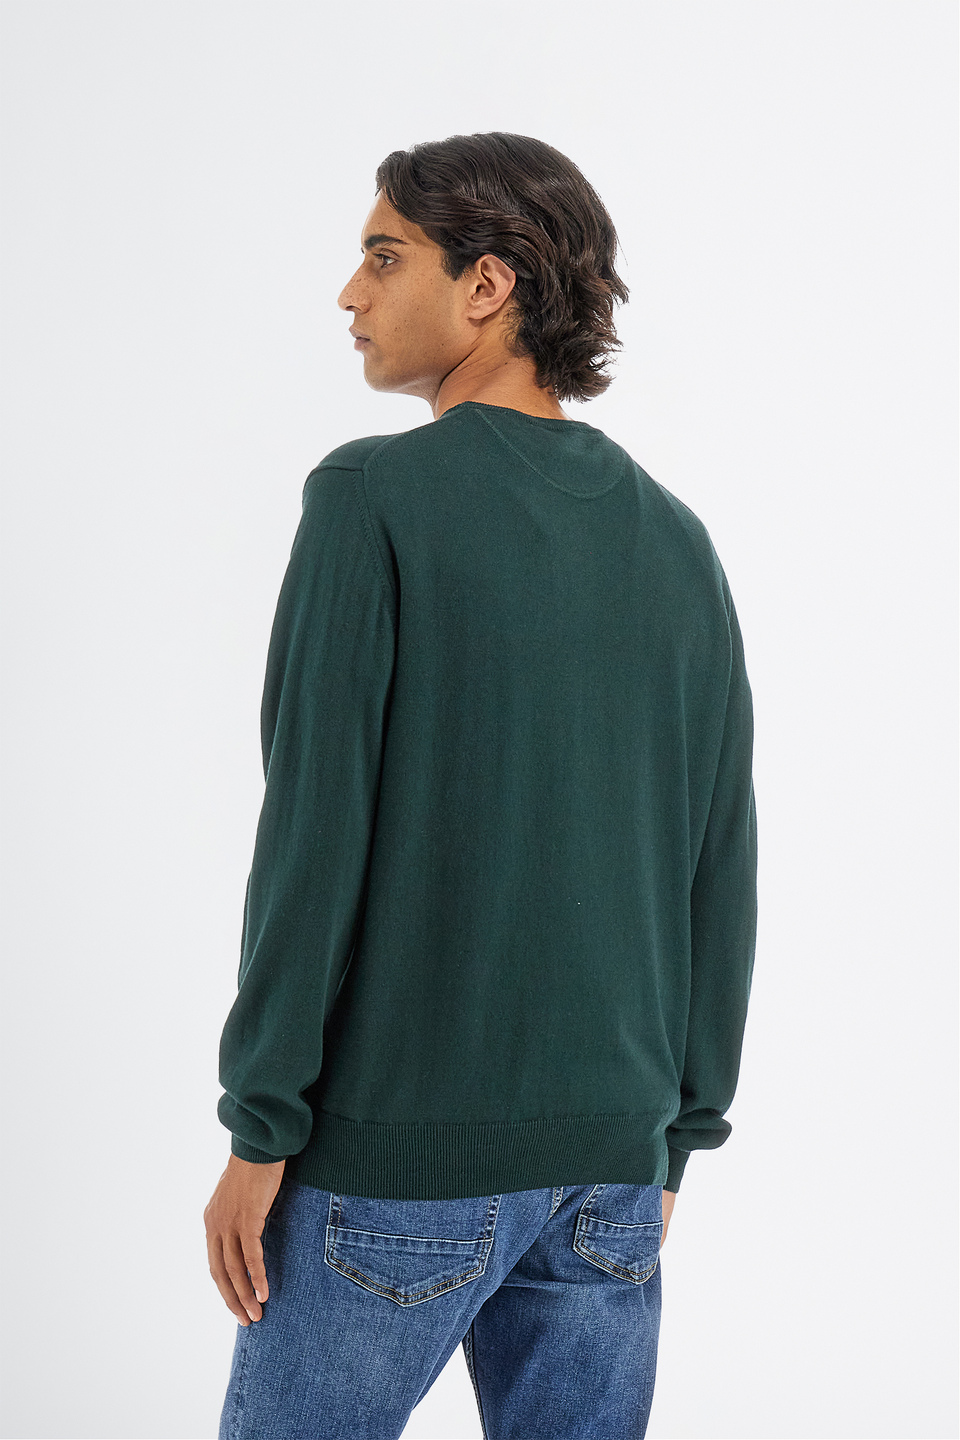 Men’s knitted sweater with long sleeves in cotton and wool blend regular fit | La Martina - Official Online Shop